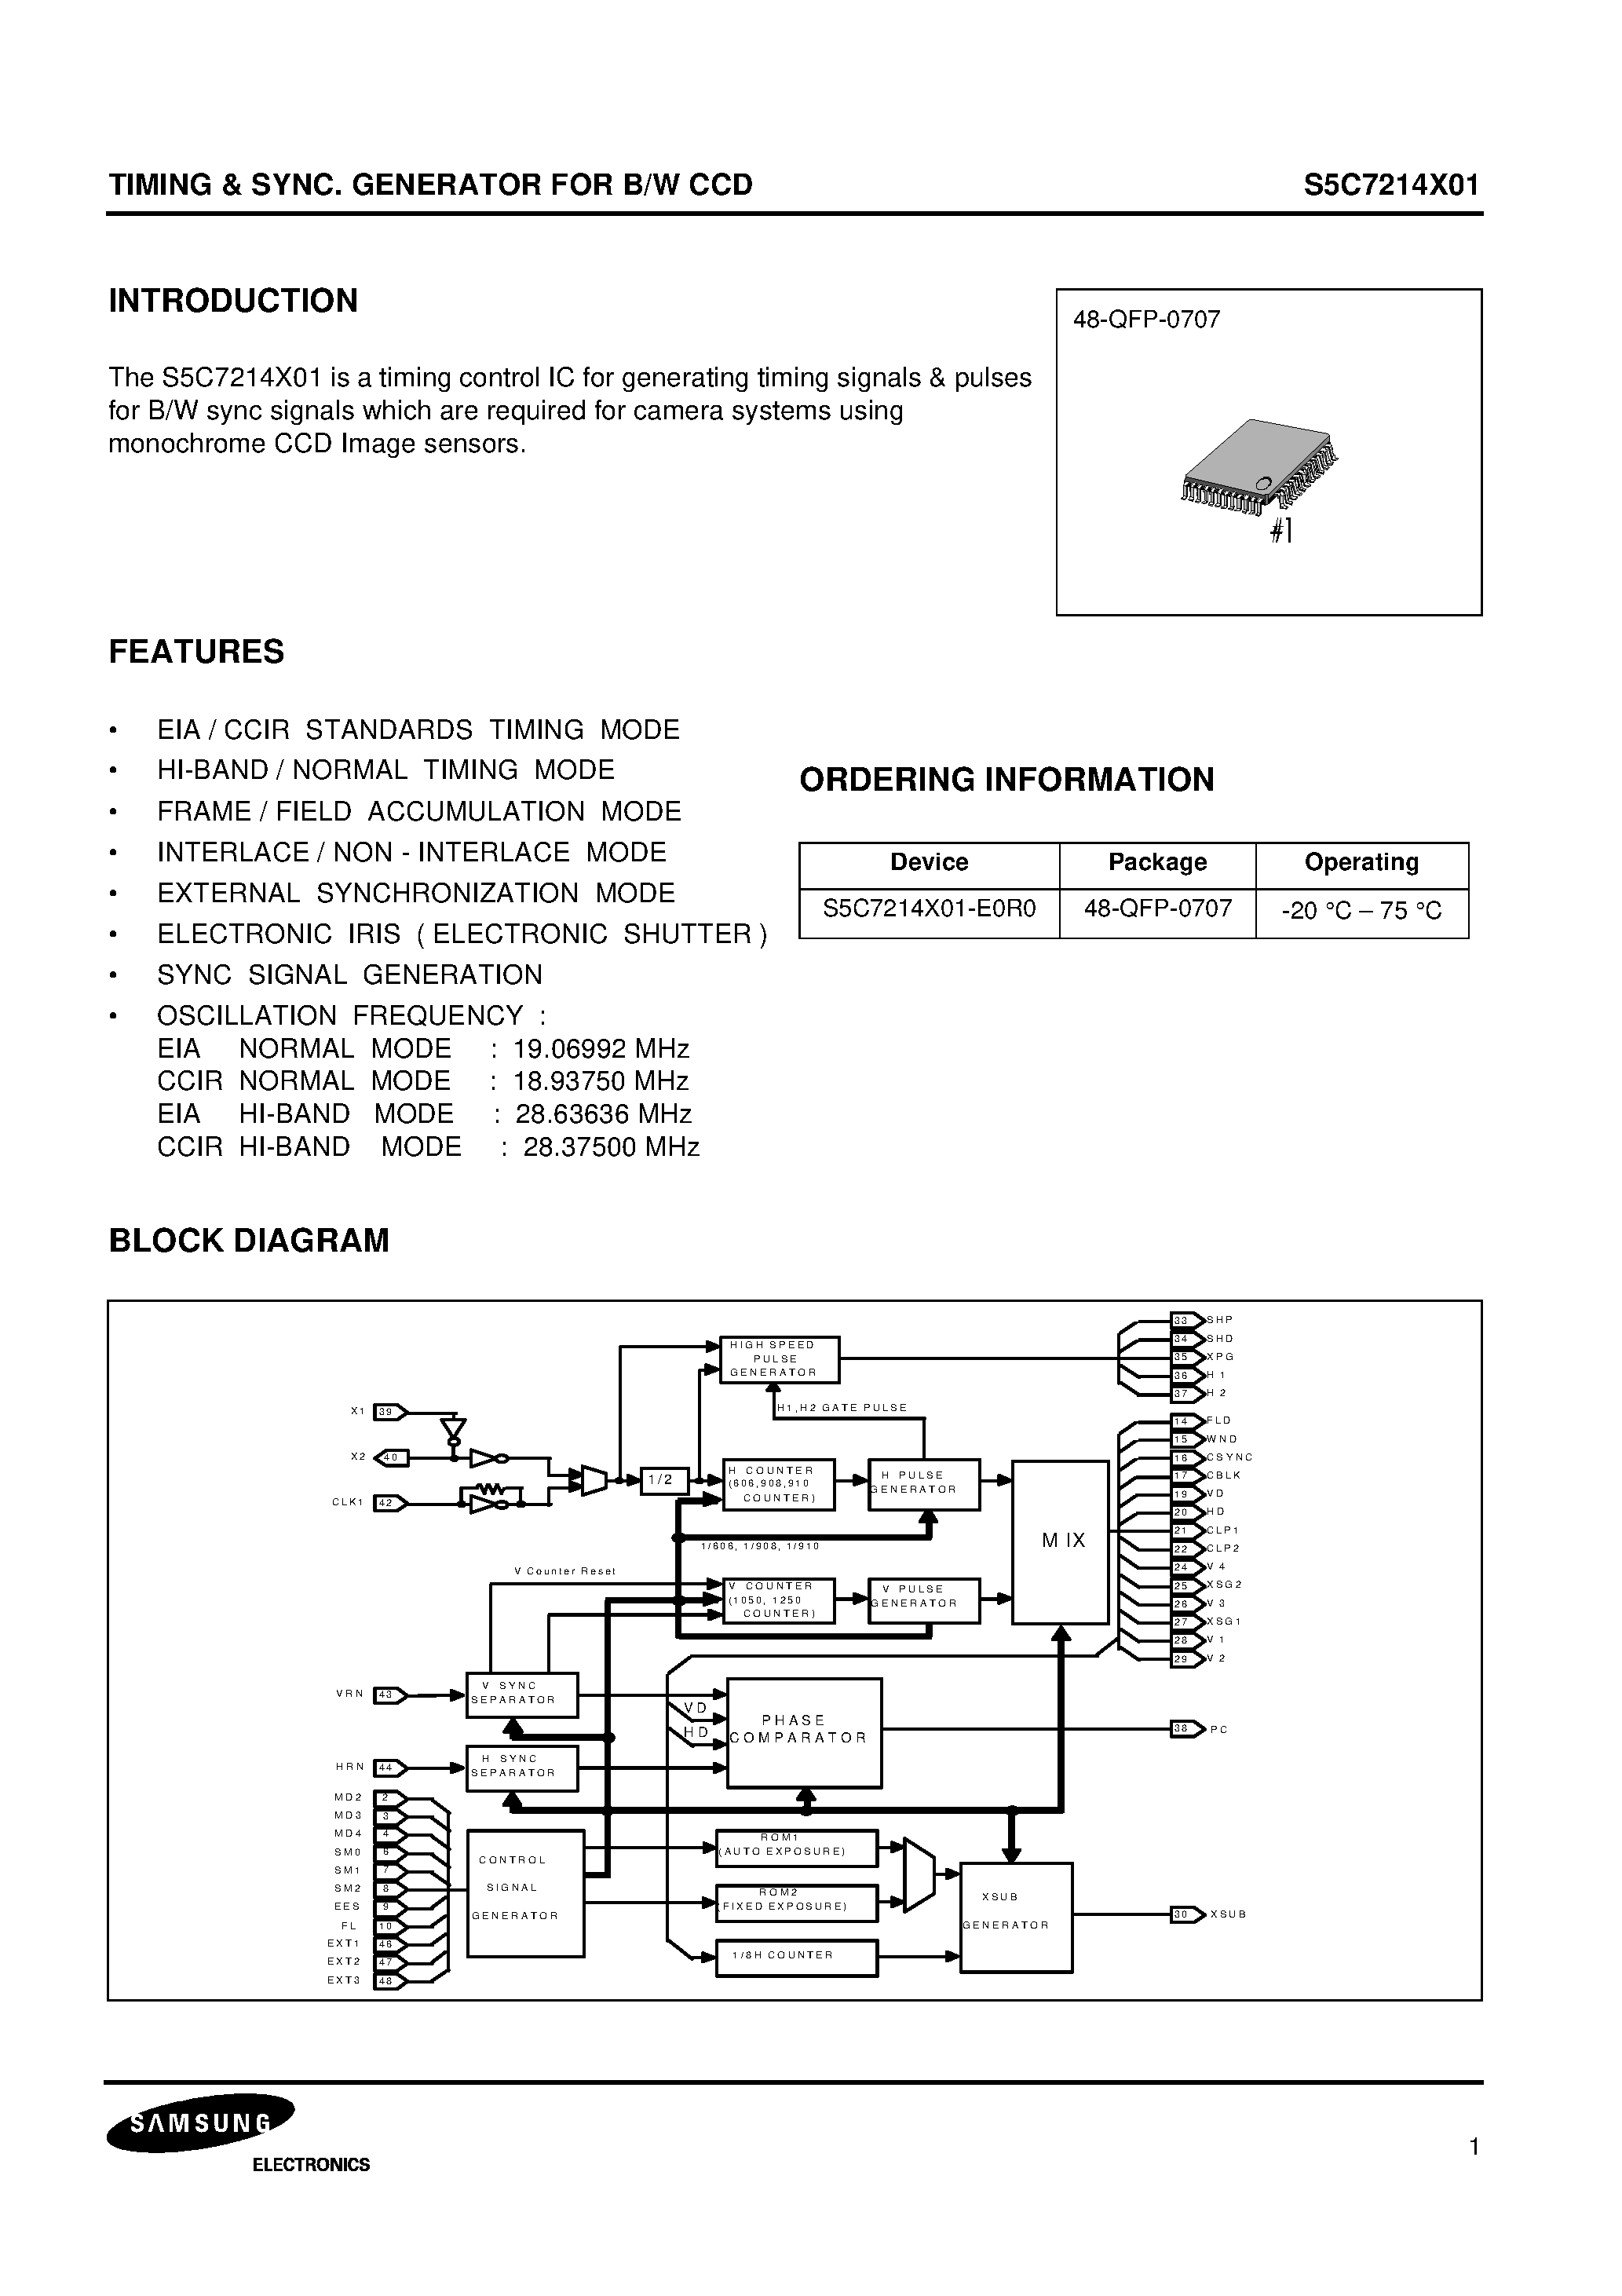 Datasheet S5C7214X01-E0R0 - TIMING & SYNC. GENERATOR FOR B/W CCD page 1